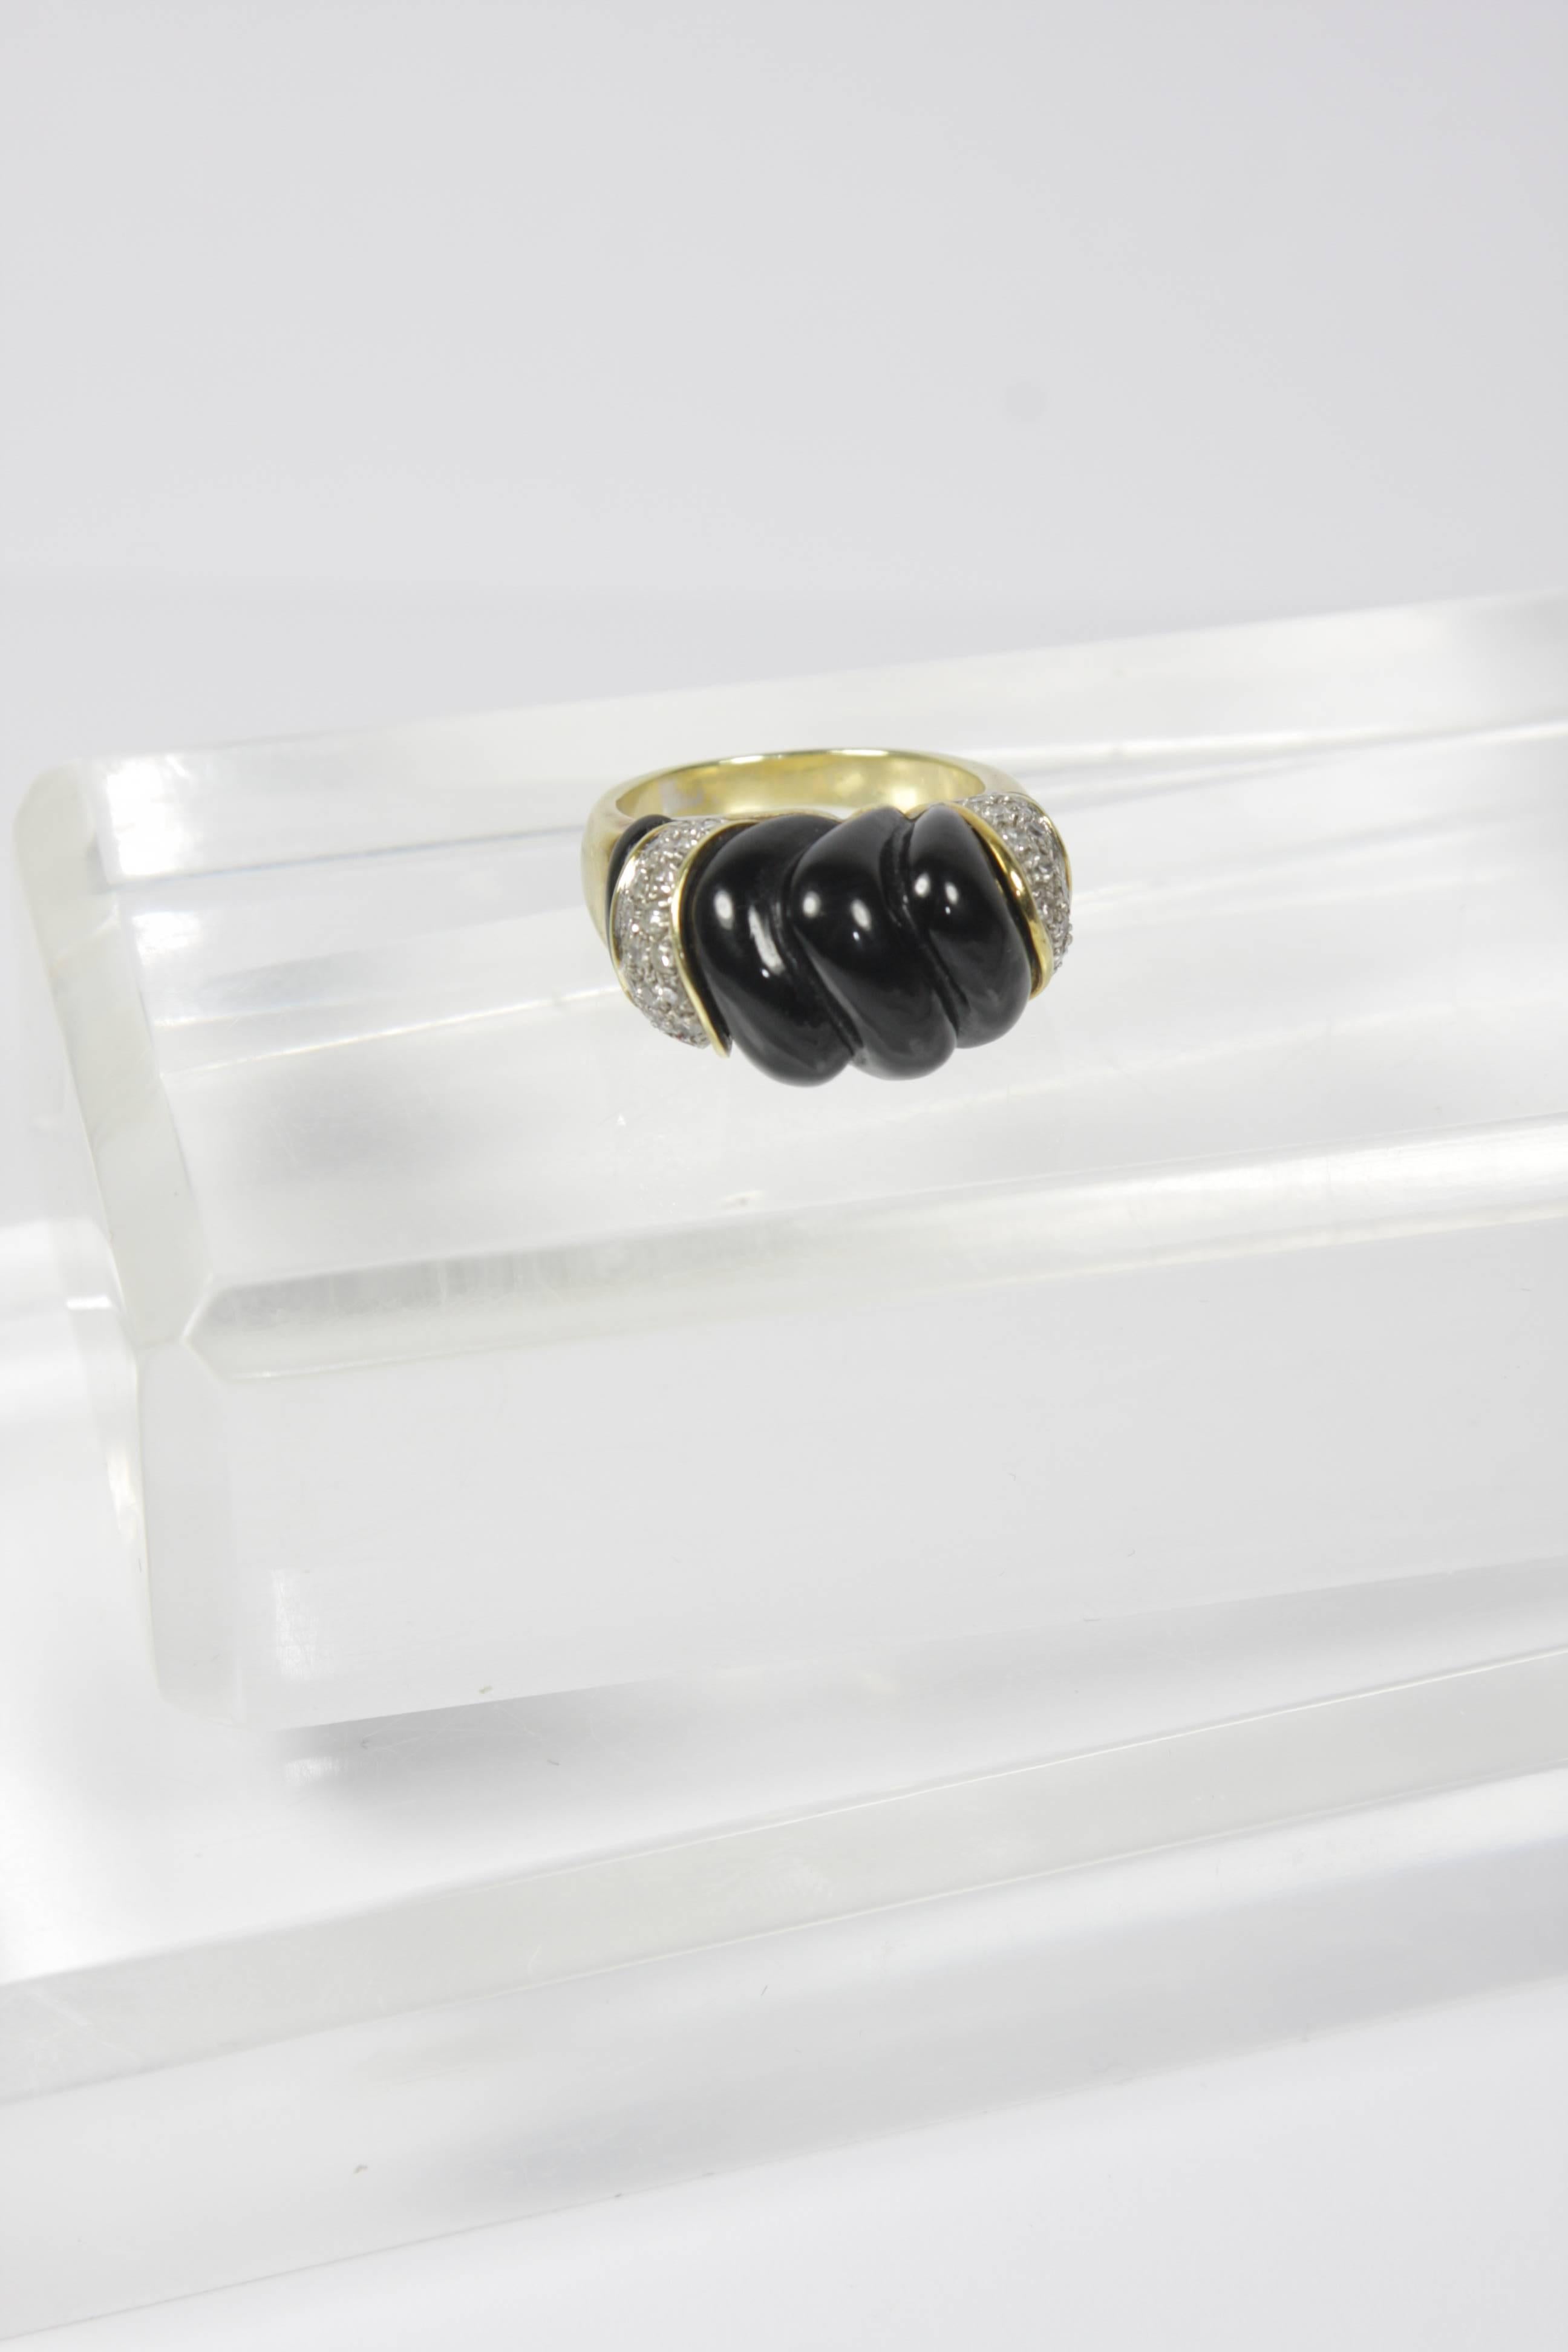 This vintage Van Cleef and Arpels inspired ring is composed of 14KT yellow gold, onyx, and is accented with pave diamonds. 

Specs: 
14 KT Yellow Gold 
Size 7